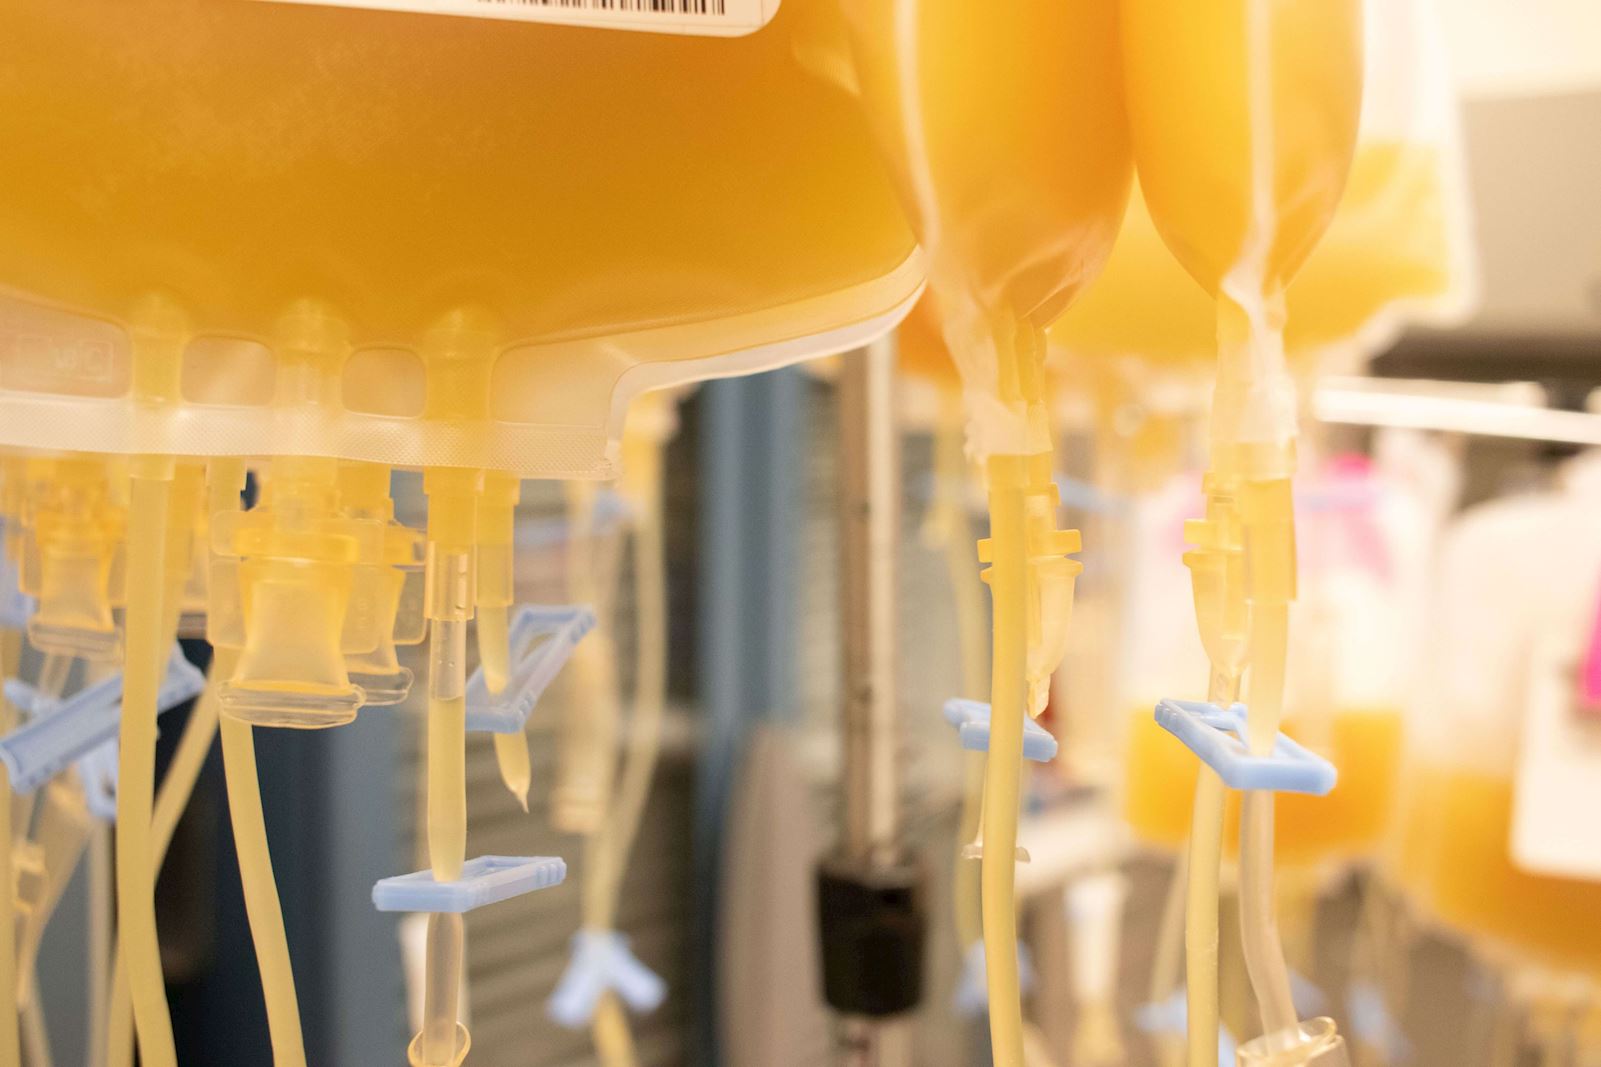 Platelets are frequently used for many patients in various situations, from trauma to heart surgery.